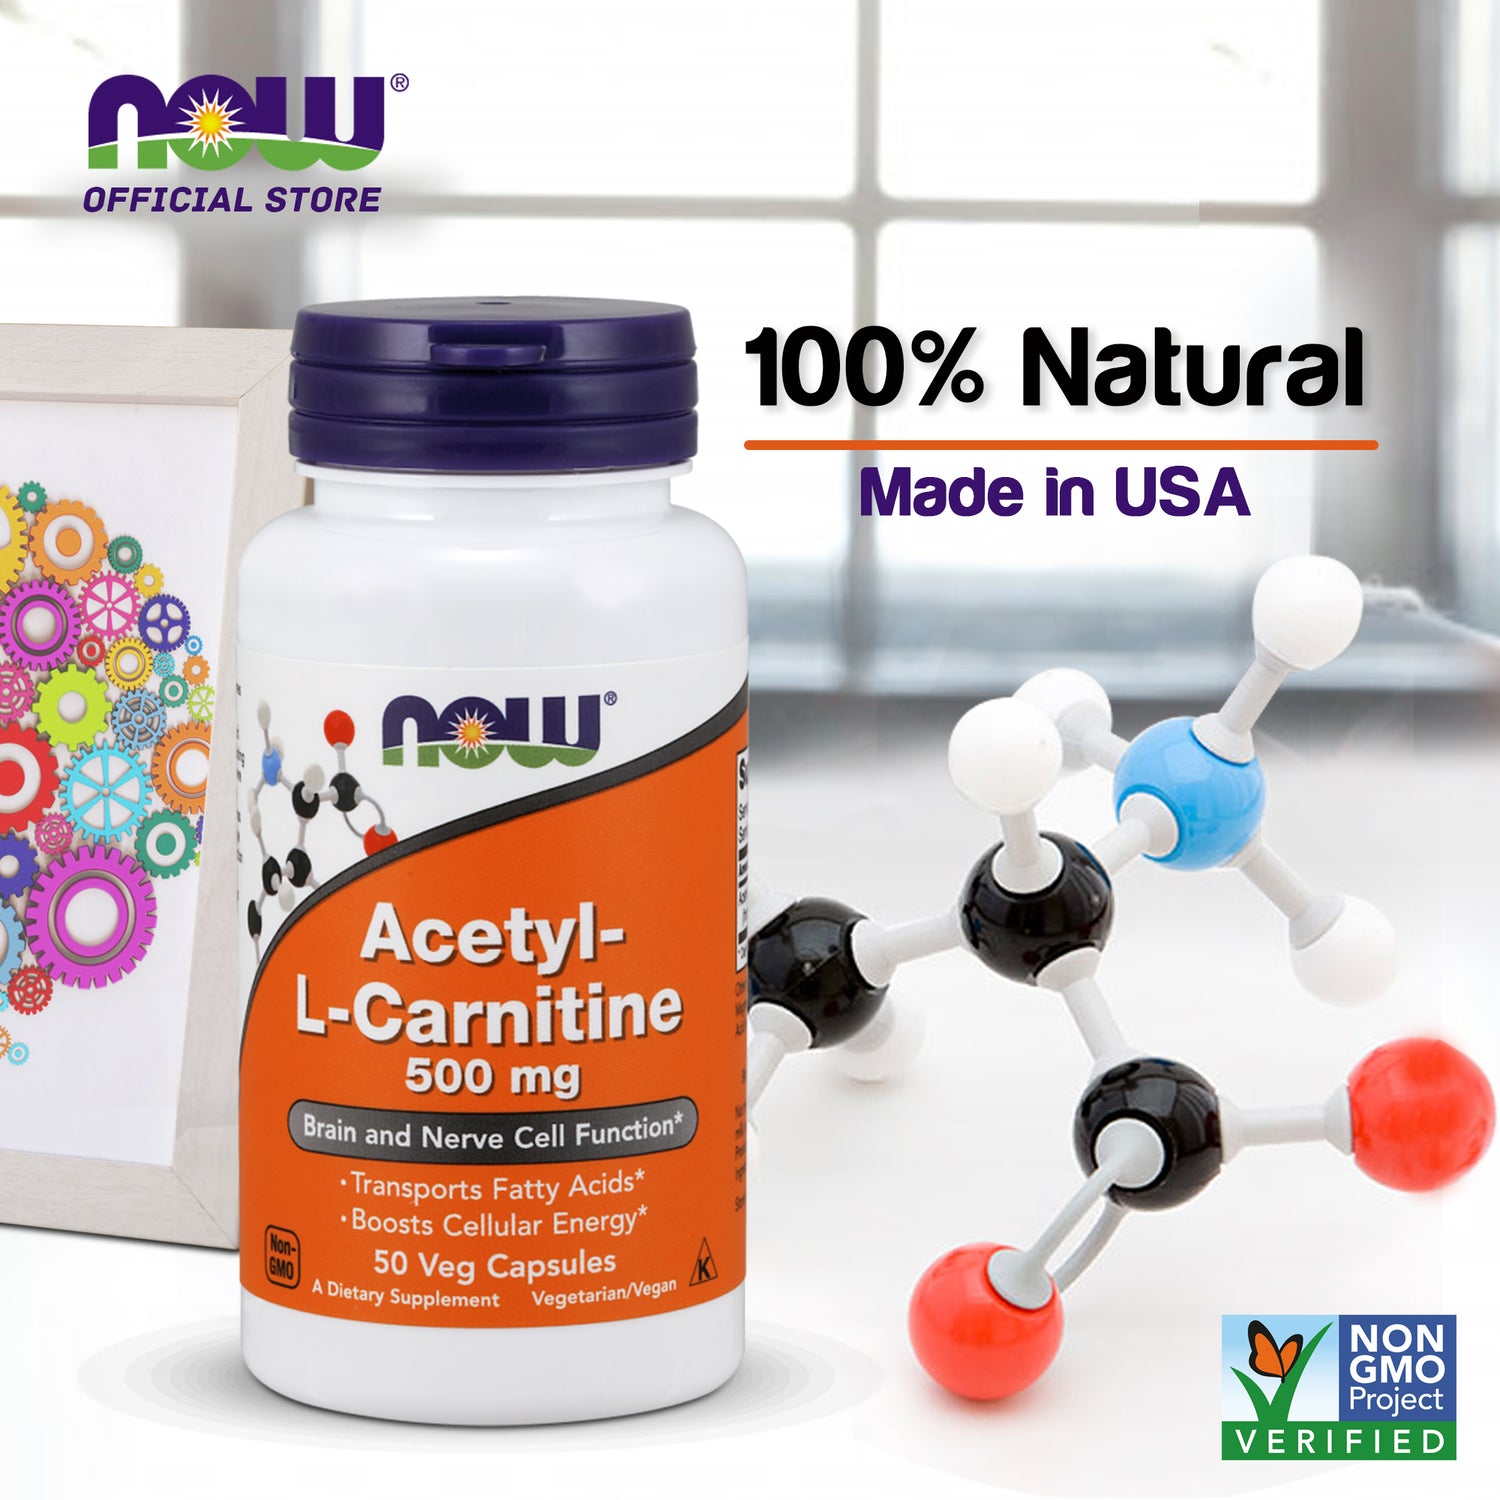 NOW Supplements, Acetyl-L Carnitine 500 mg, Amino Acid, Brain And Nerve Cell Function*, 50 Veg Capsules - Bloom Concept